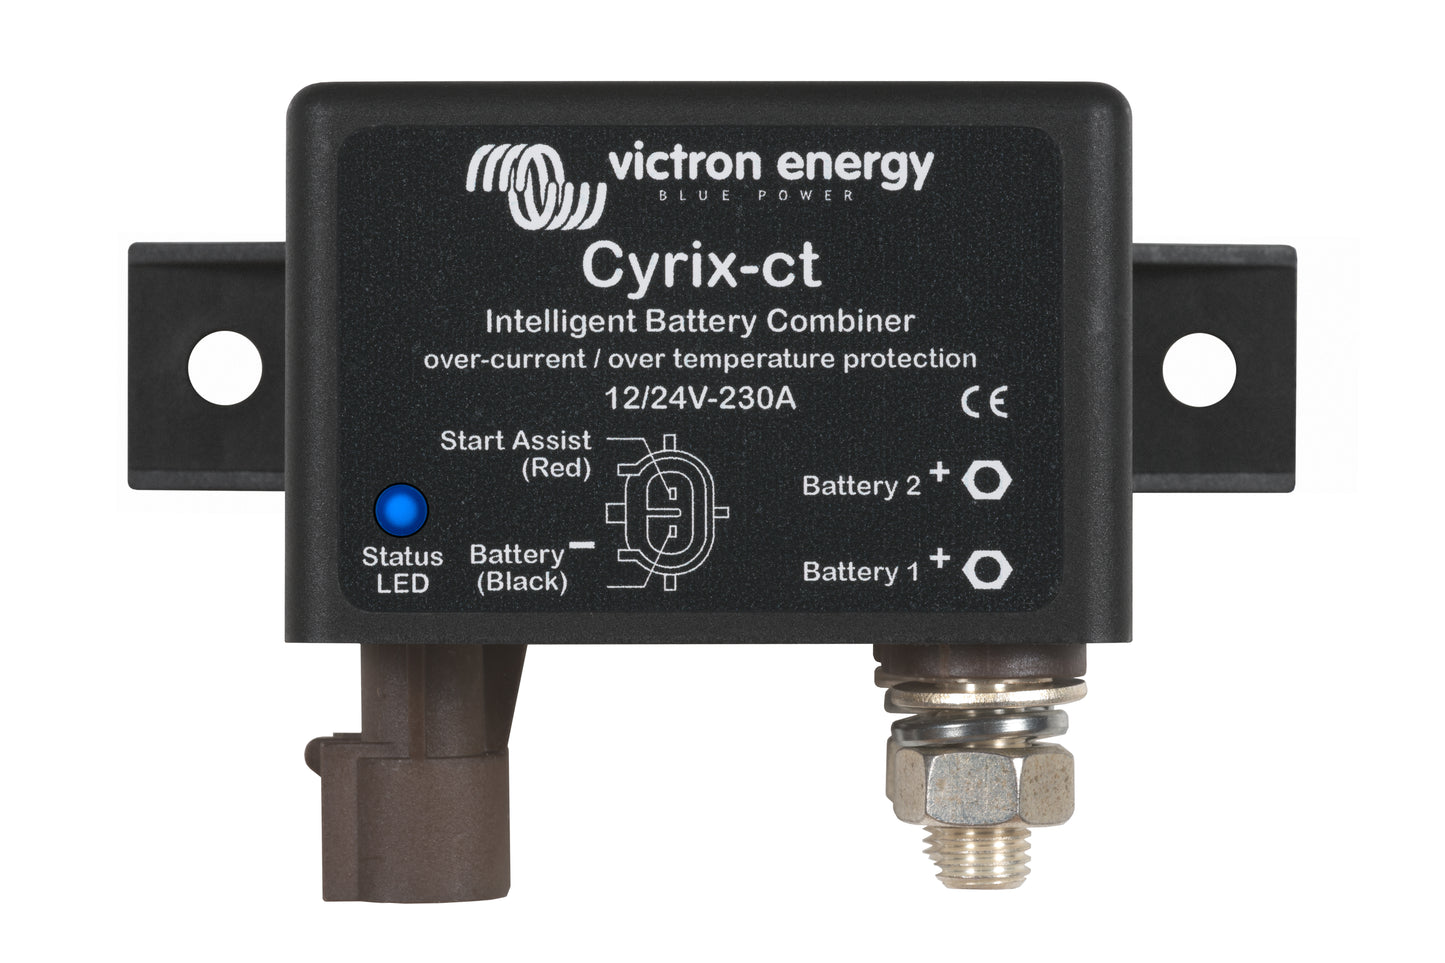 Victron Battery Combiner Cyrix CYR010230010 Cyrix-ct 12/24V-230A intelligent battery combiner